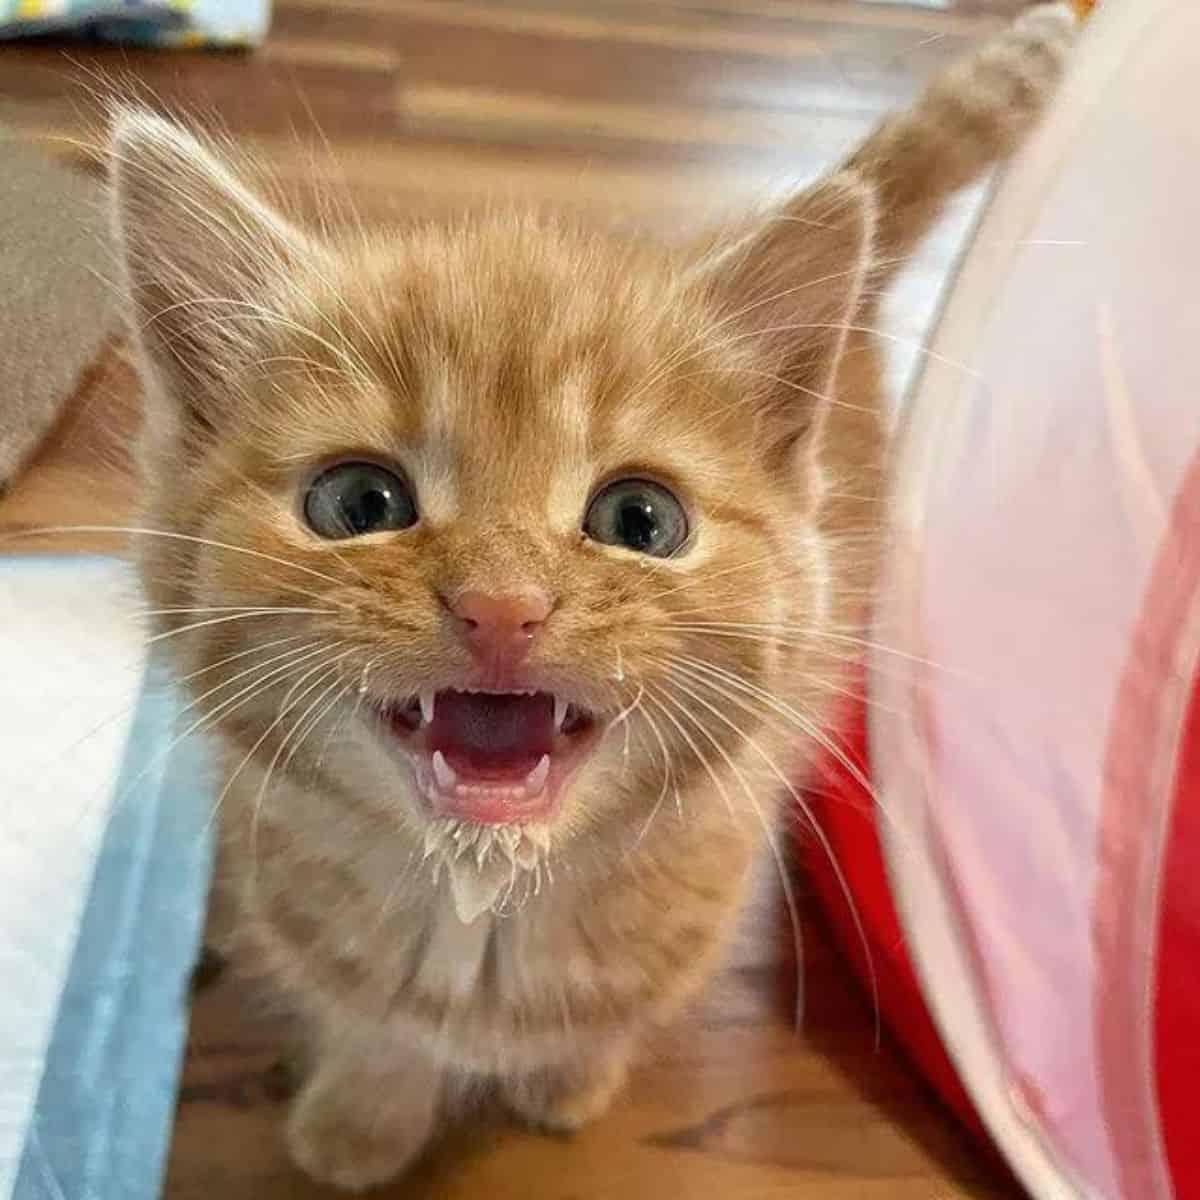 the yellow kitten in front of the camera is laughing